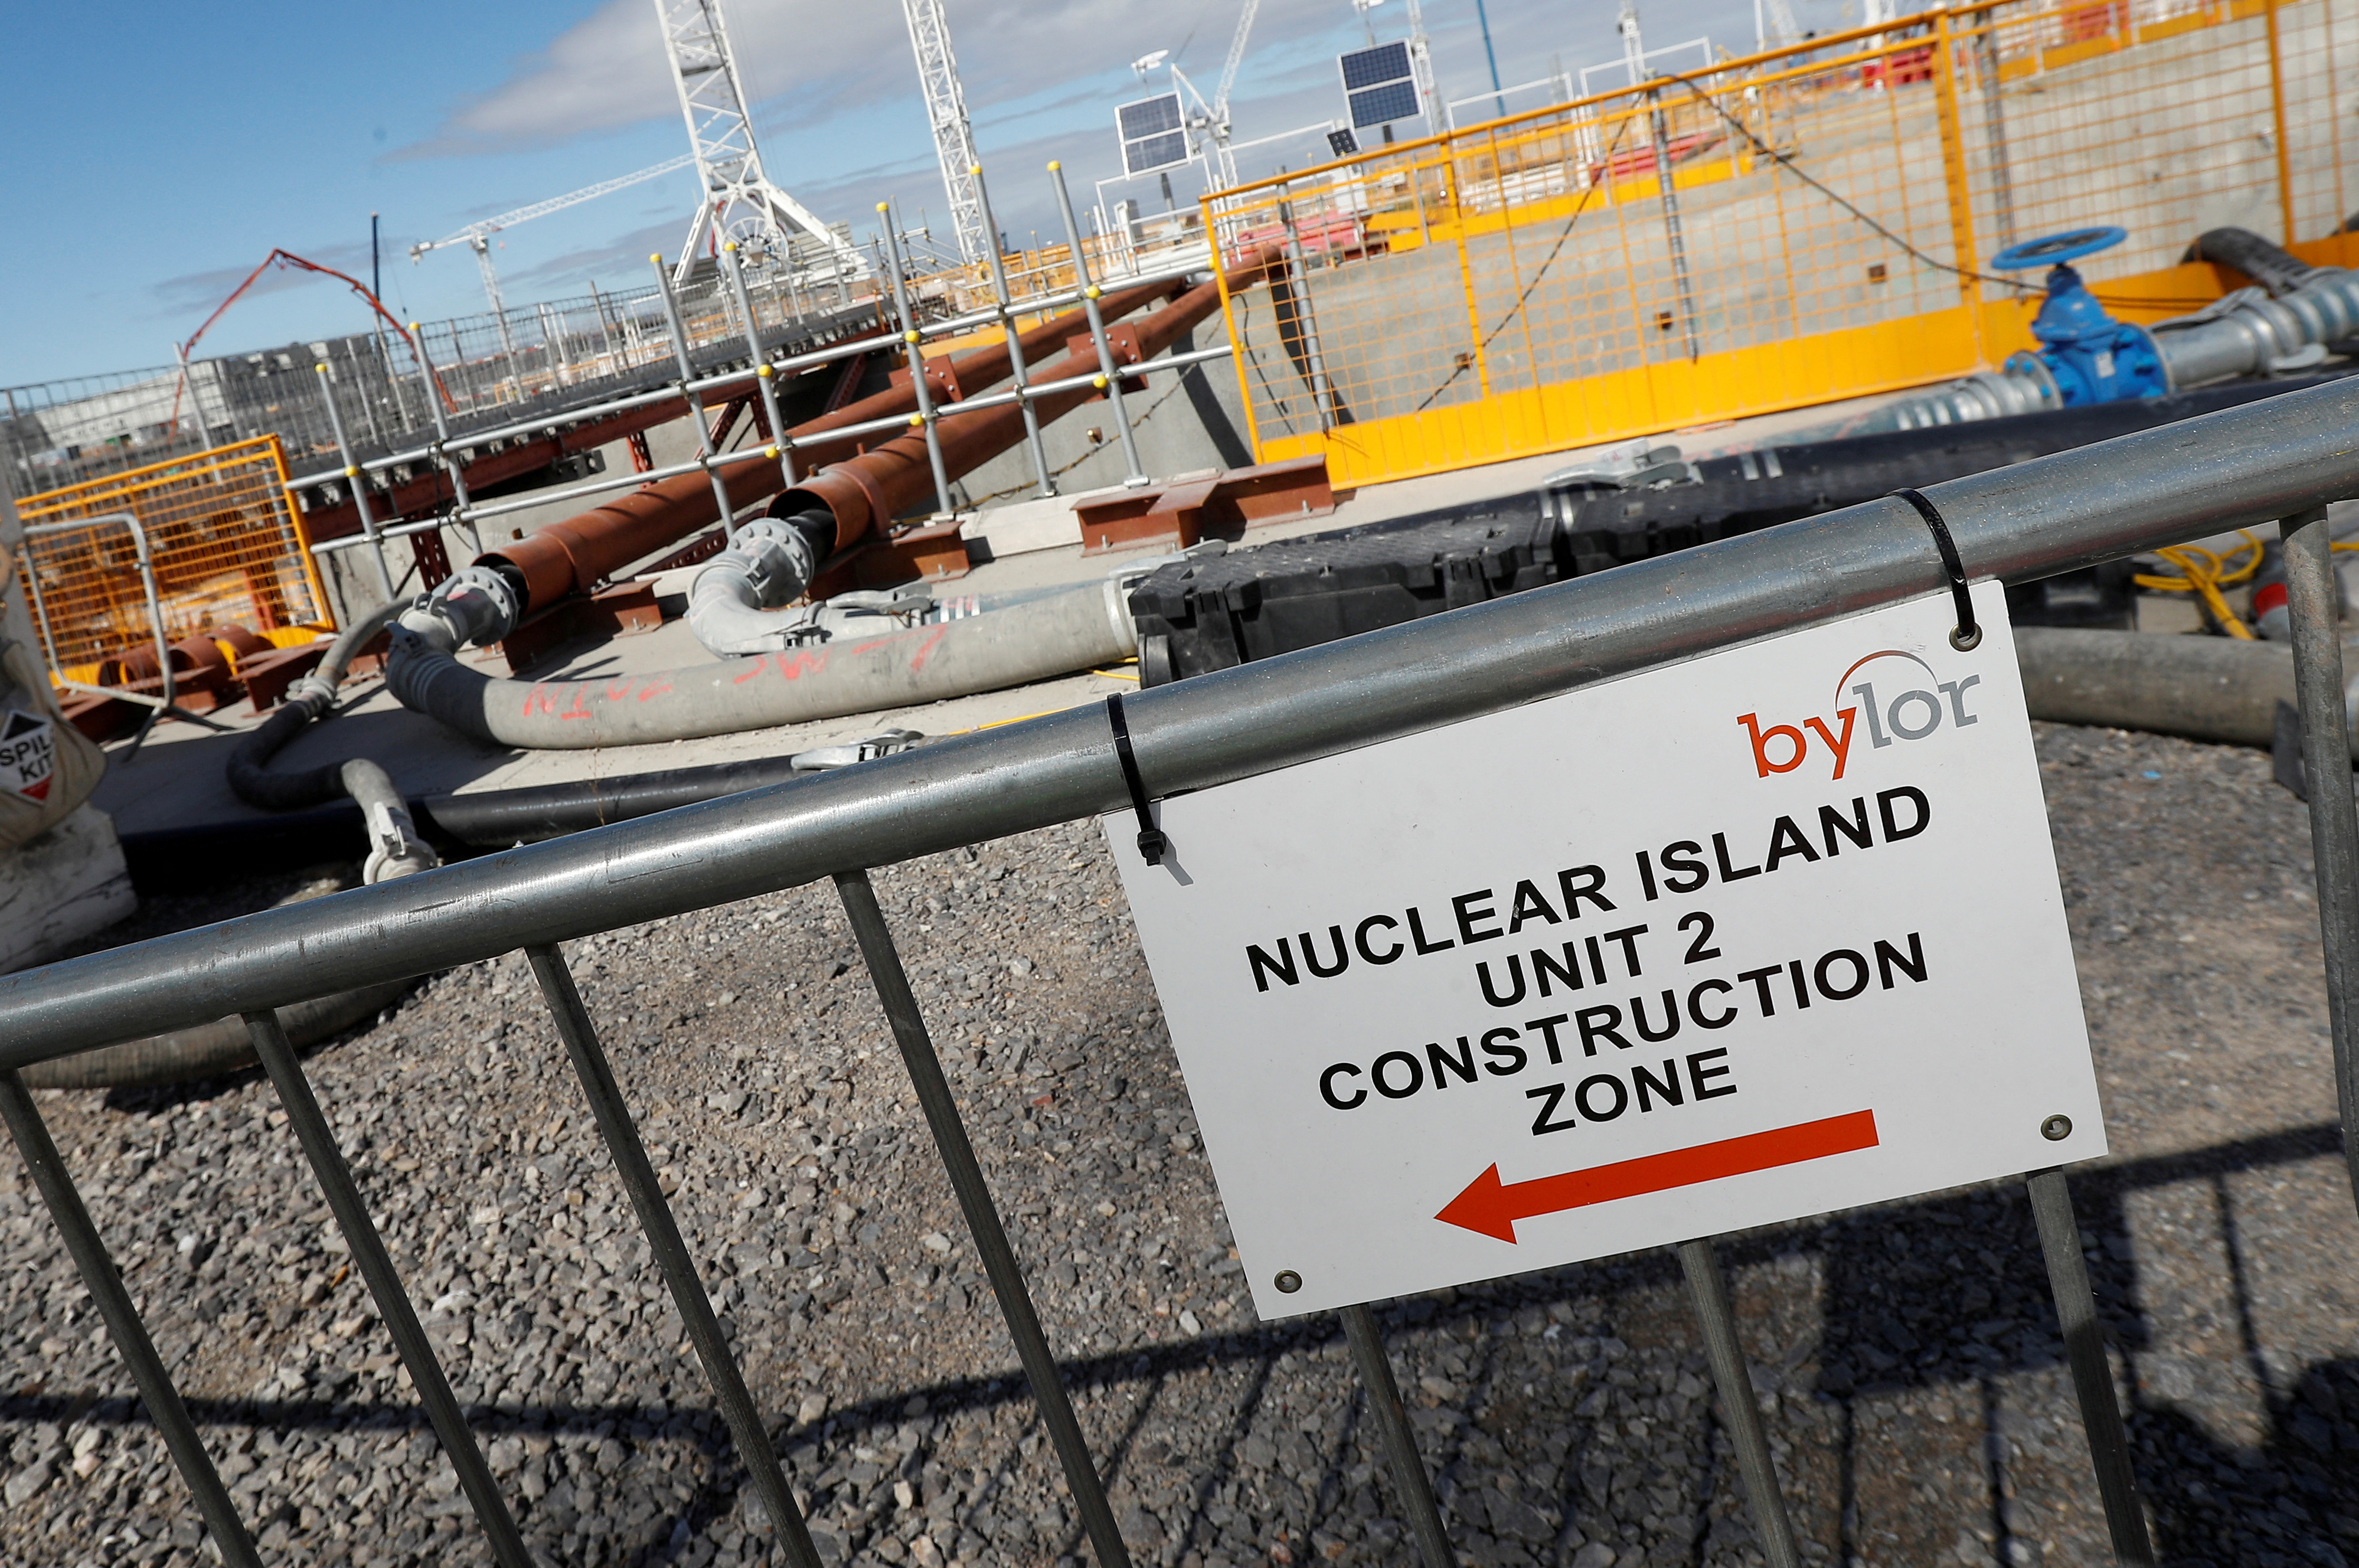 A sign that directs people to the nuclear reactor area under construction, is seen at Hinkley Point C nuclear power station site, near Bridgwater